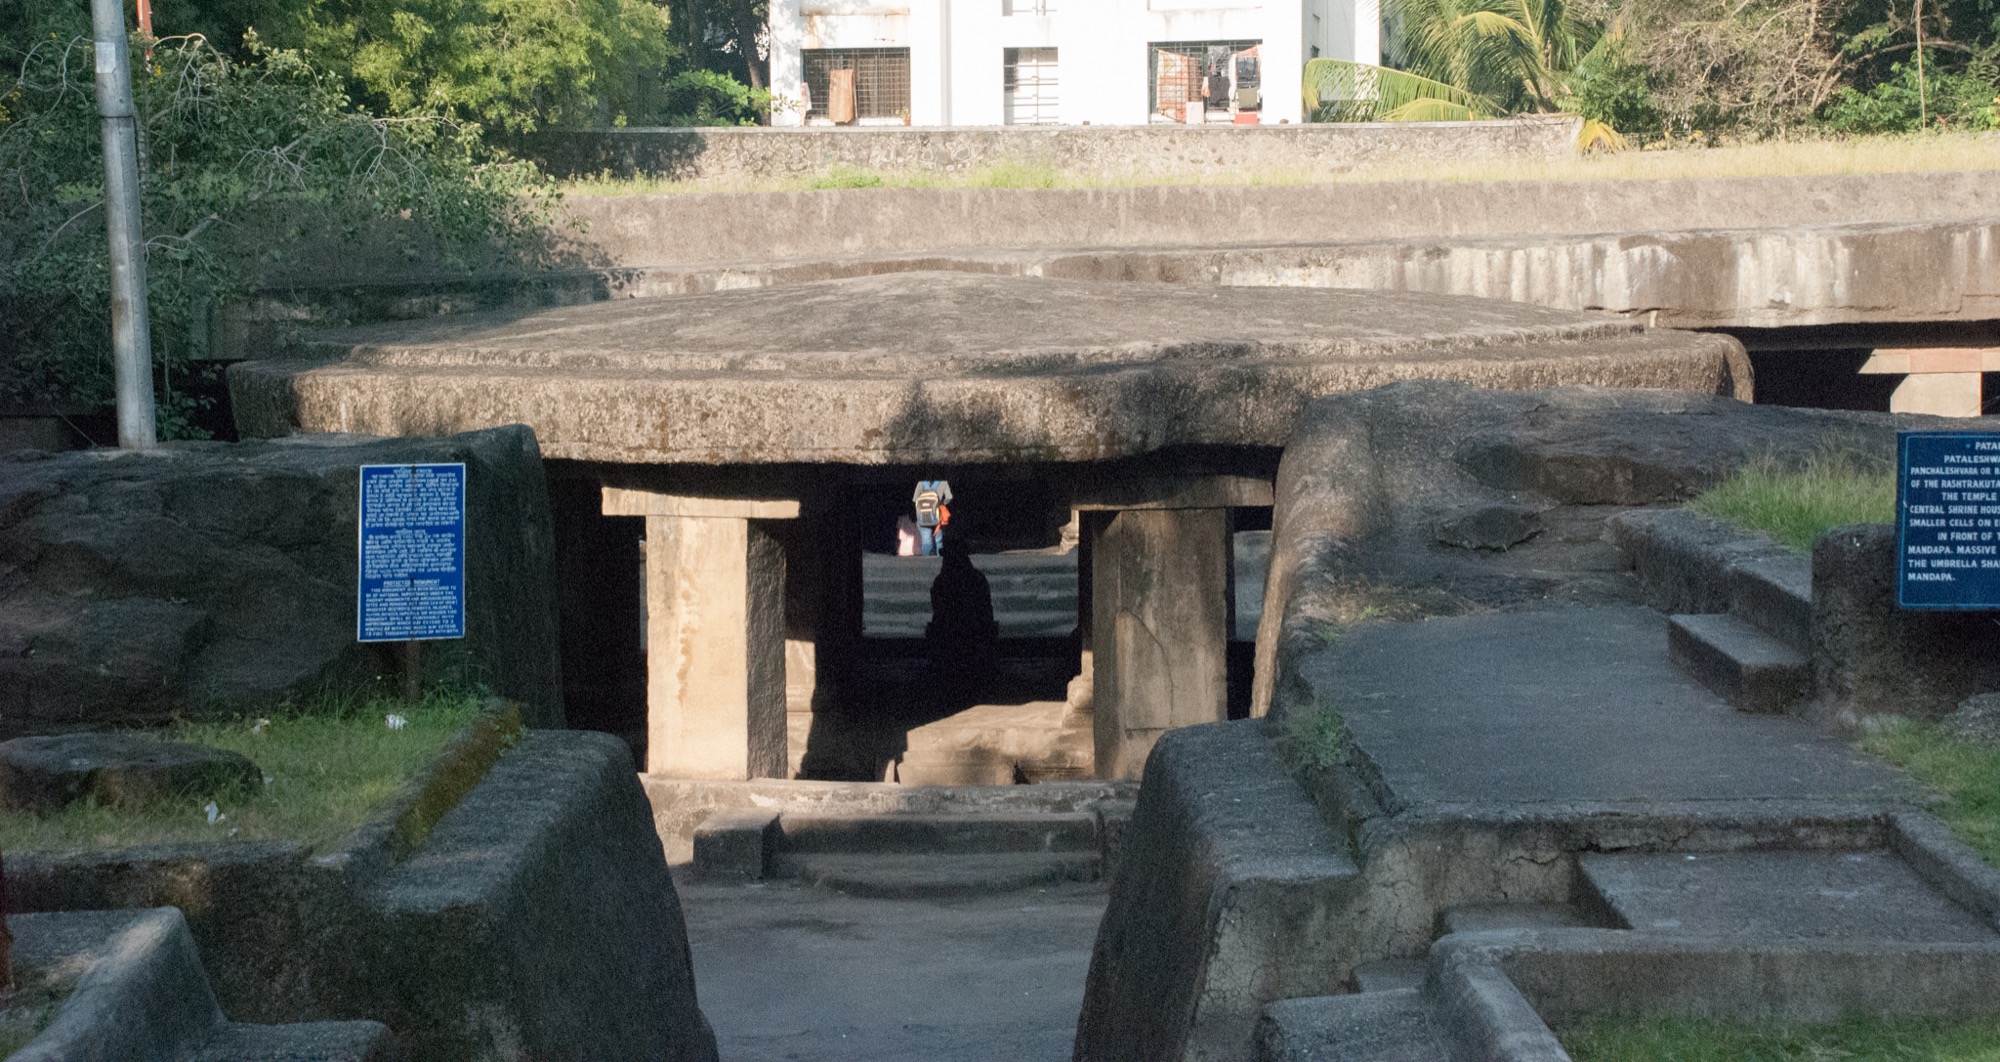 Pataleshwar caves - Pune’s hip underground meet-up place since a cool 1300 years! 5